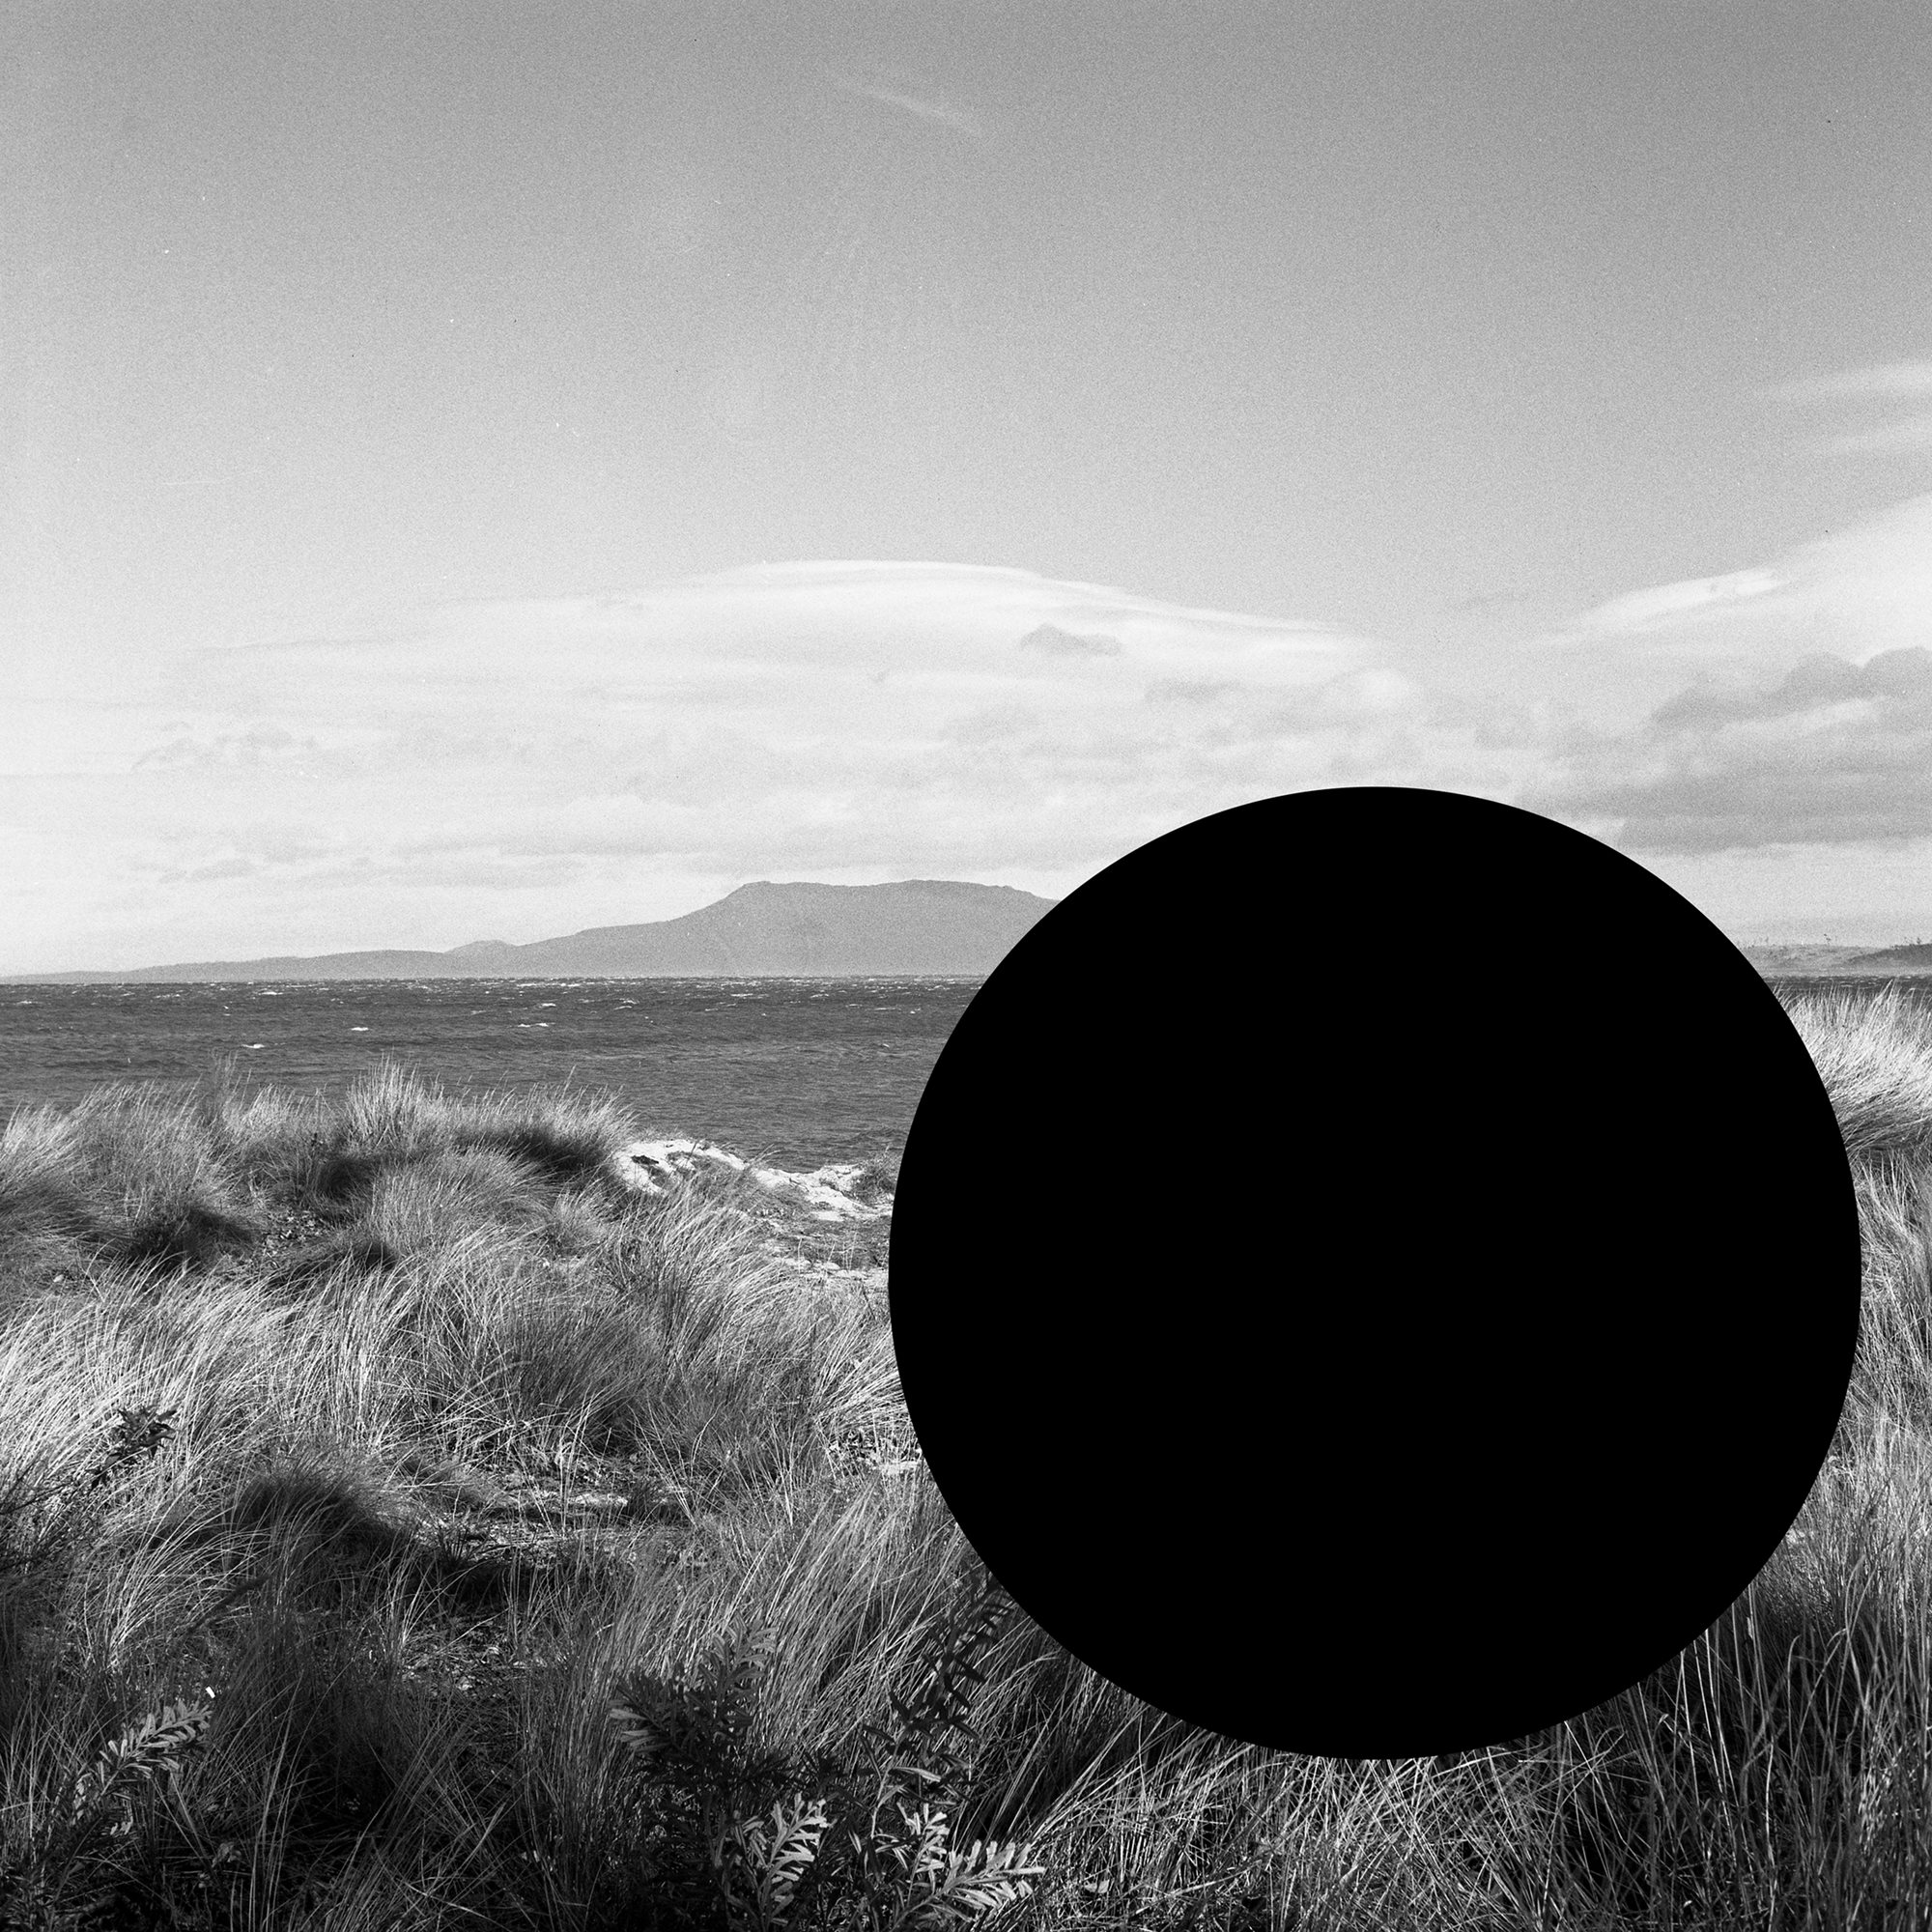 James Tylor, '(Deleted Scenes) From an Untouched Landscape #7 Knocklofty Reserve, West Hobart, Palawa Land', 2013, Inkjet print on hahnemühle paper with hole removed to a black velvet void, 63 x 63 cm framed. Courtesy the artist and UTS Art Collection  